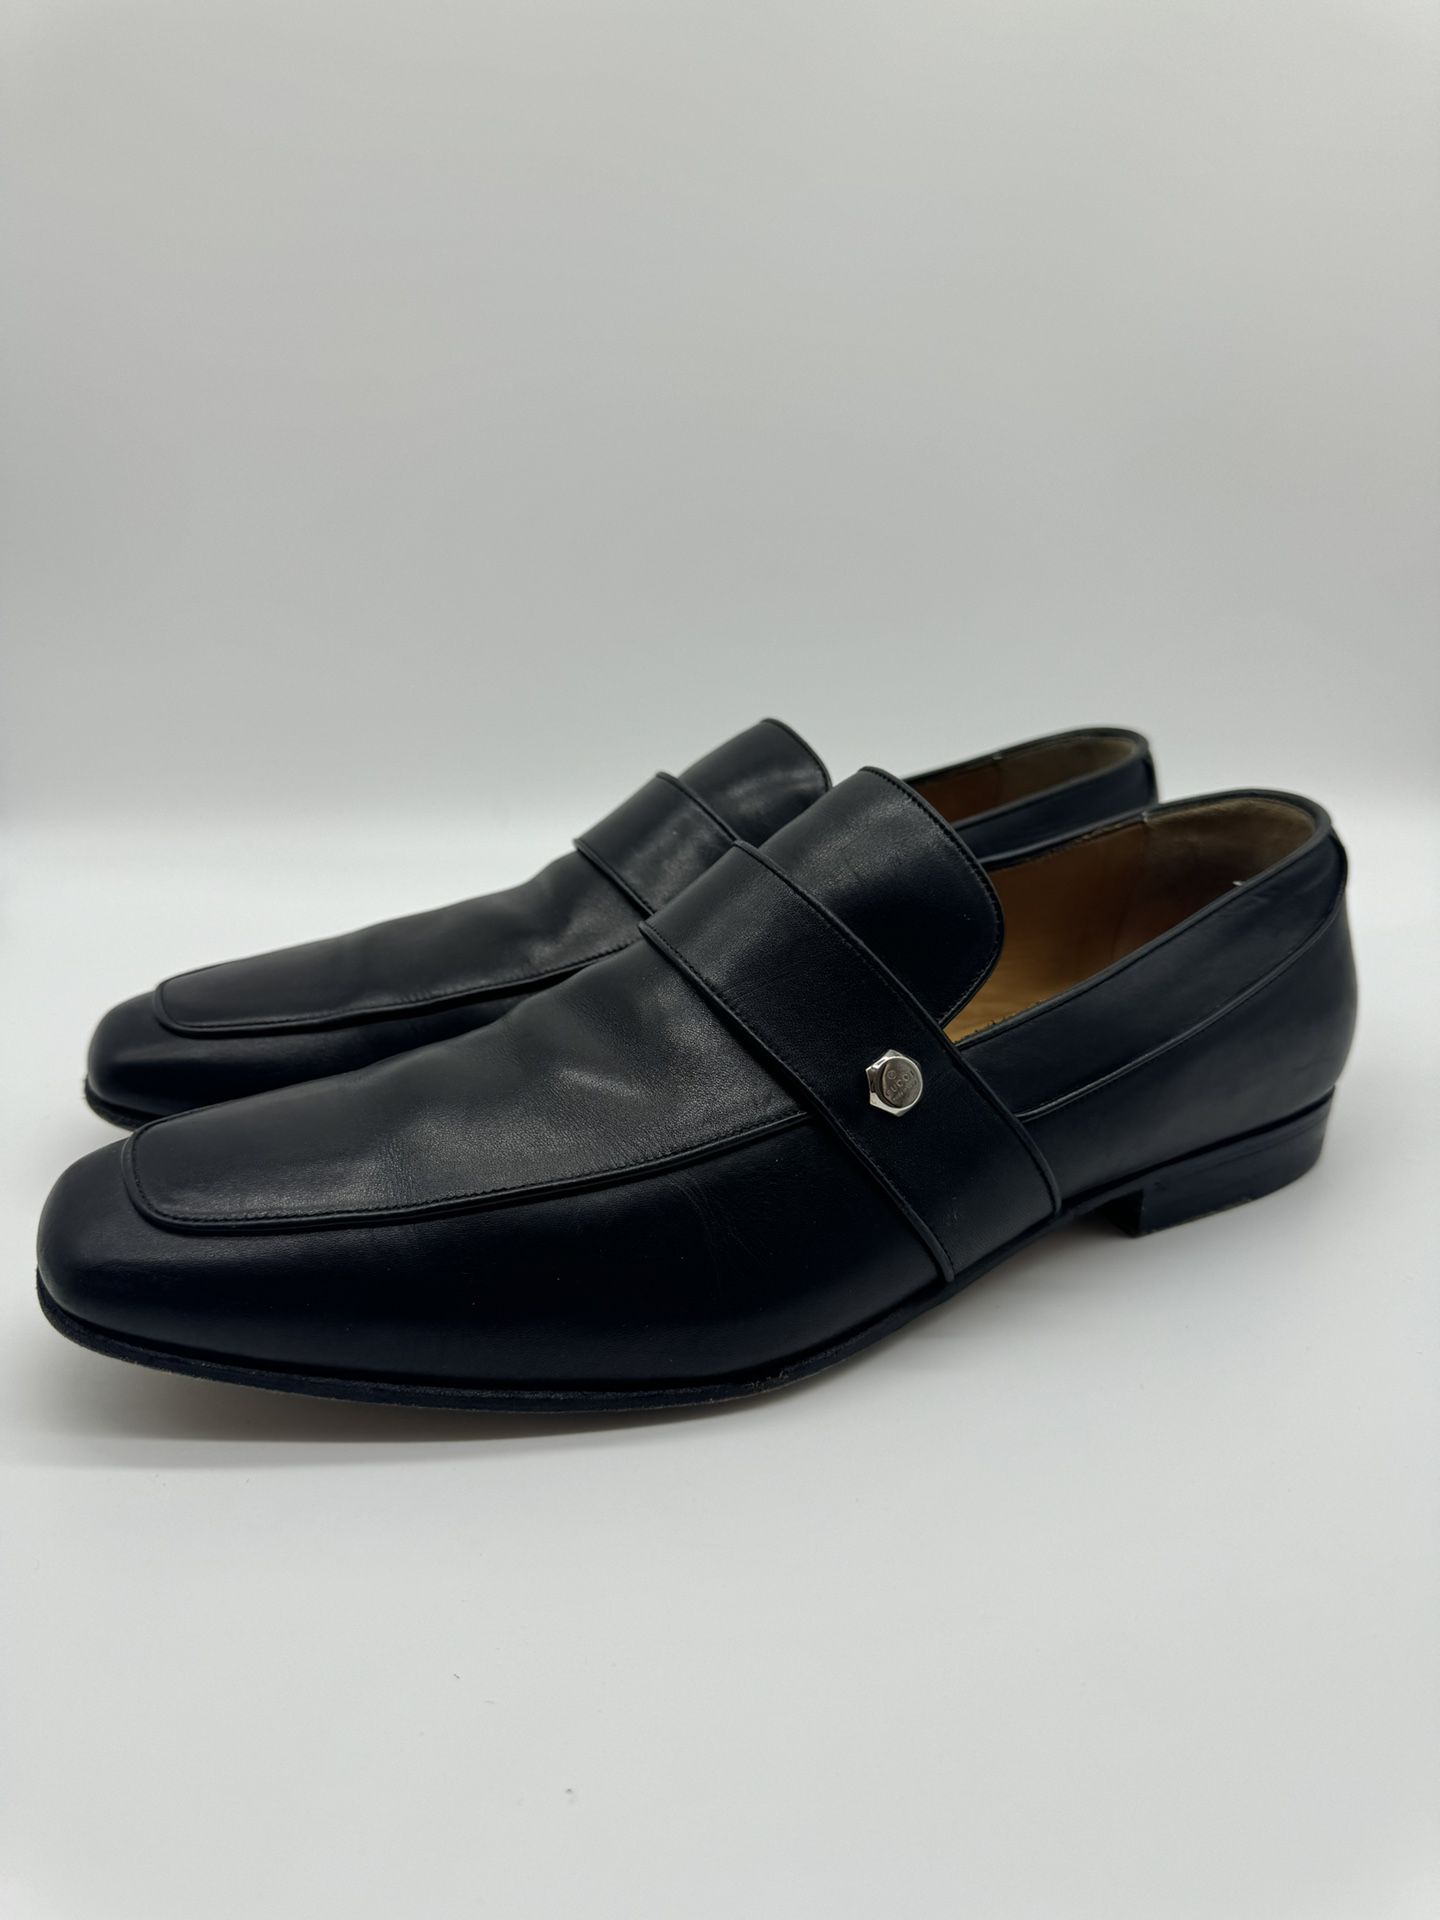 Gucci Black Leather Dress Loafers Men’s Size 8 E (Wide) 157439